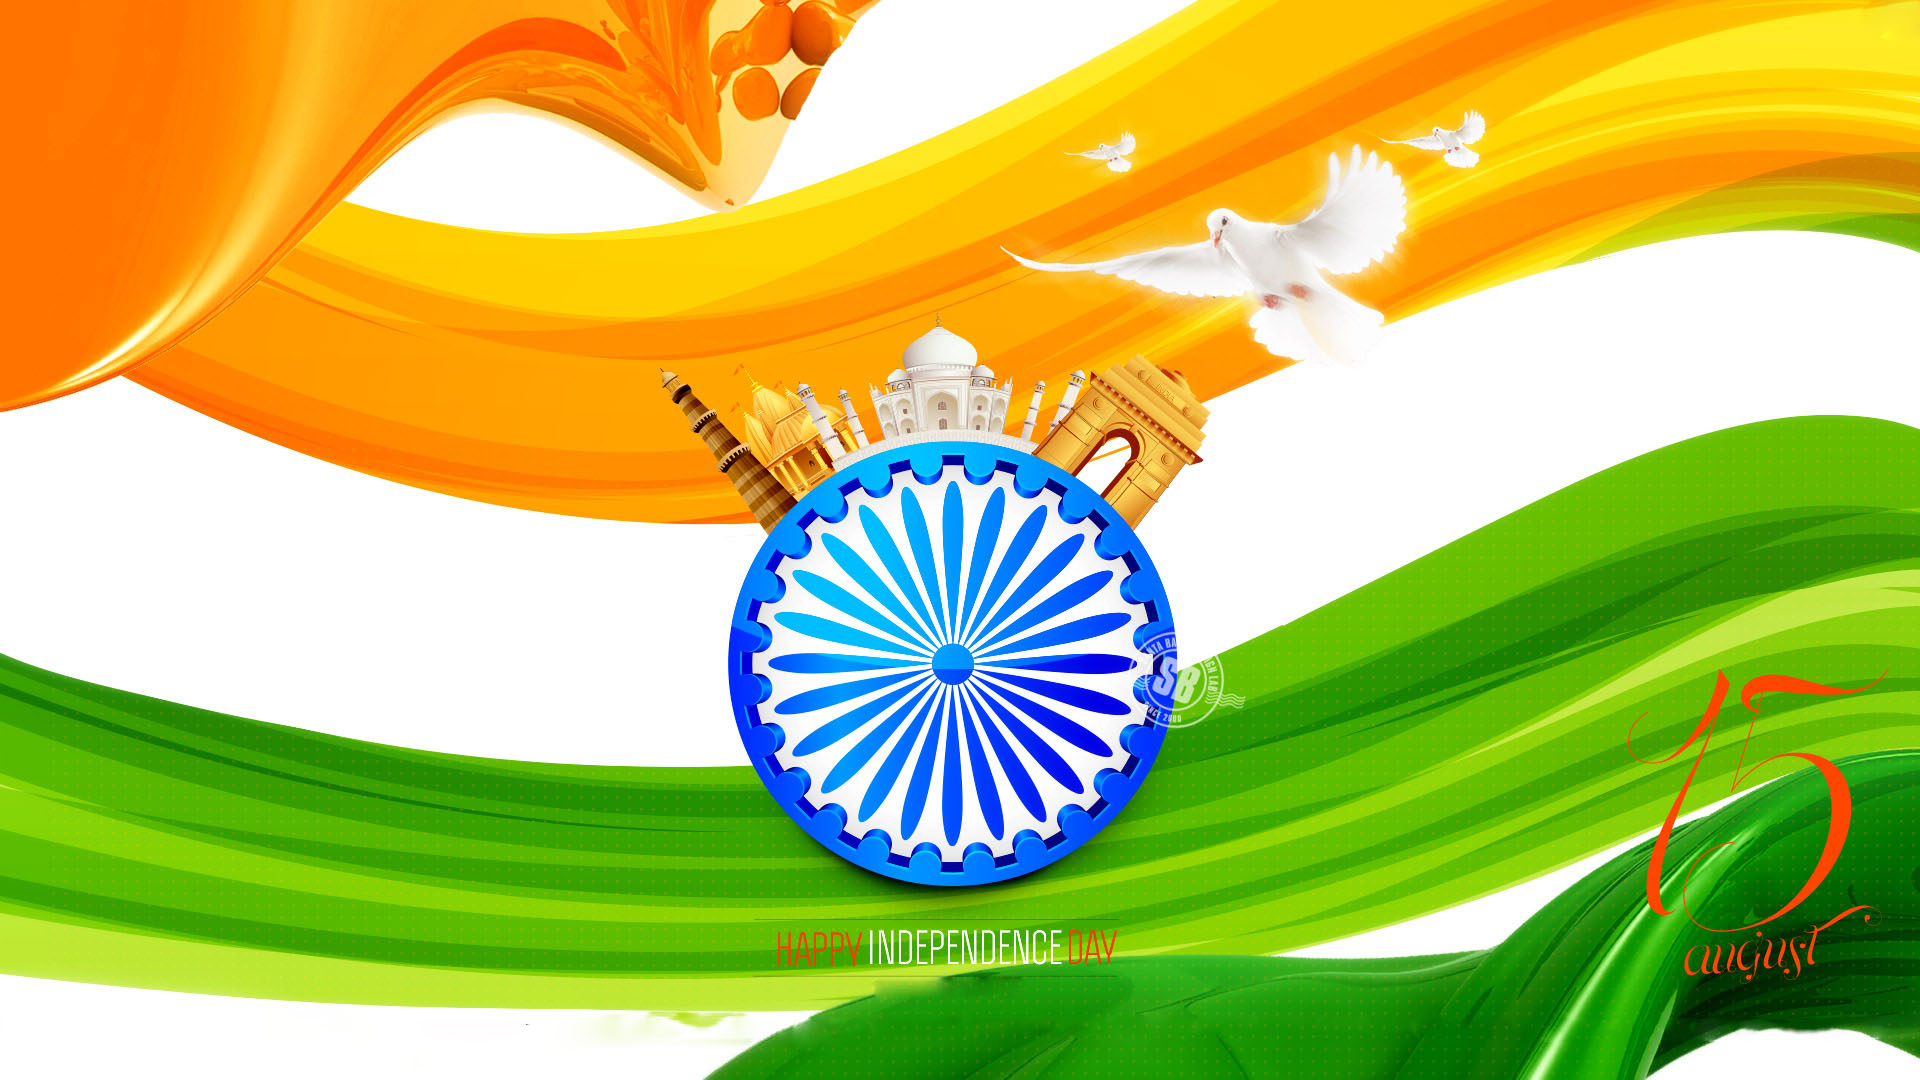 Happy Indian Independence Day 2022 (August 15th) Images, Quotes, Wishes,  Messages and Whatsapp Status